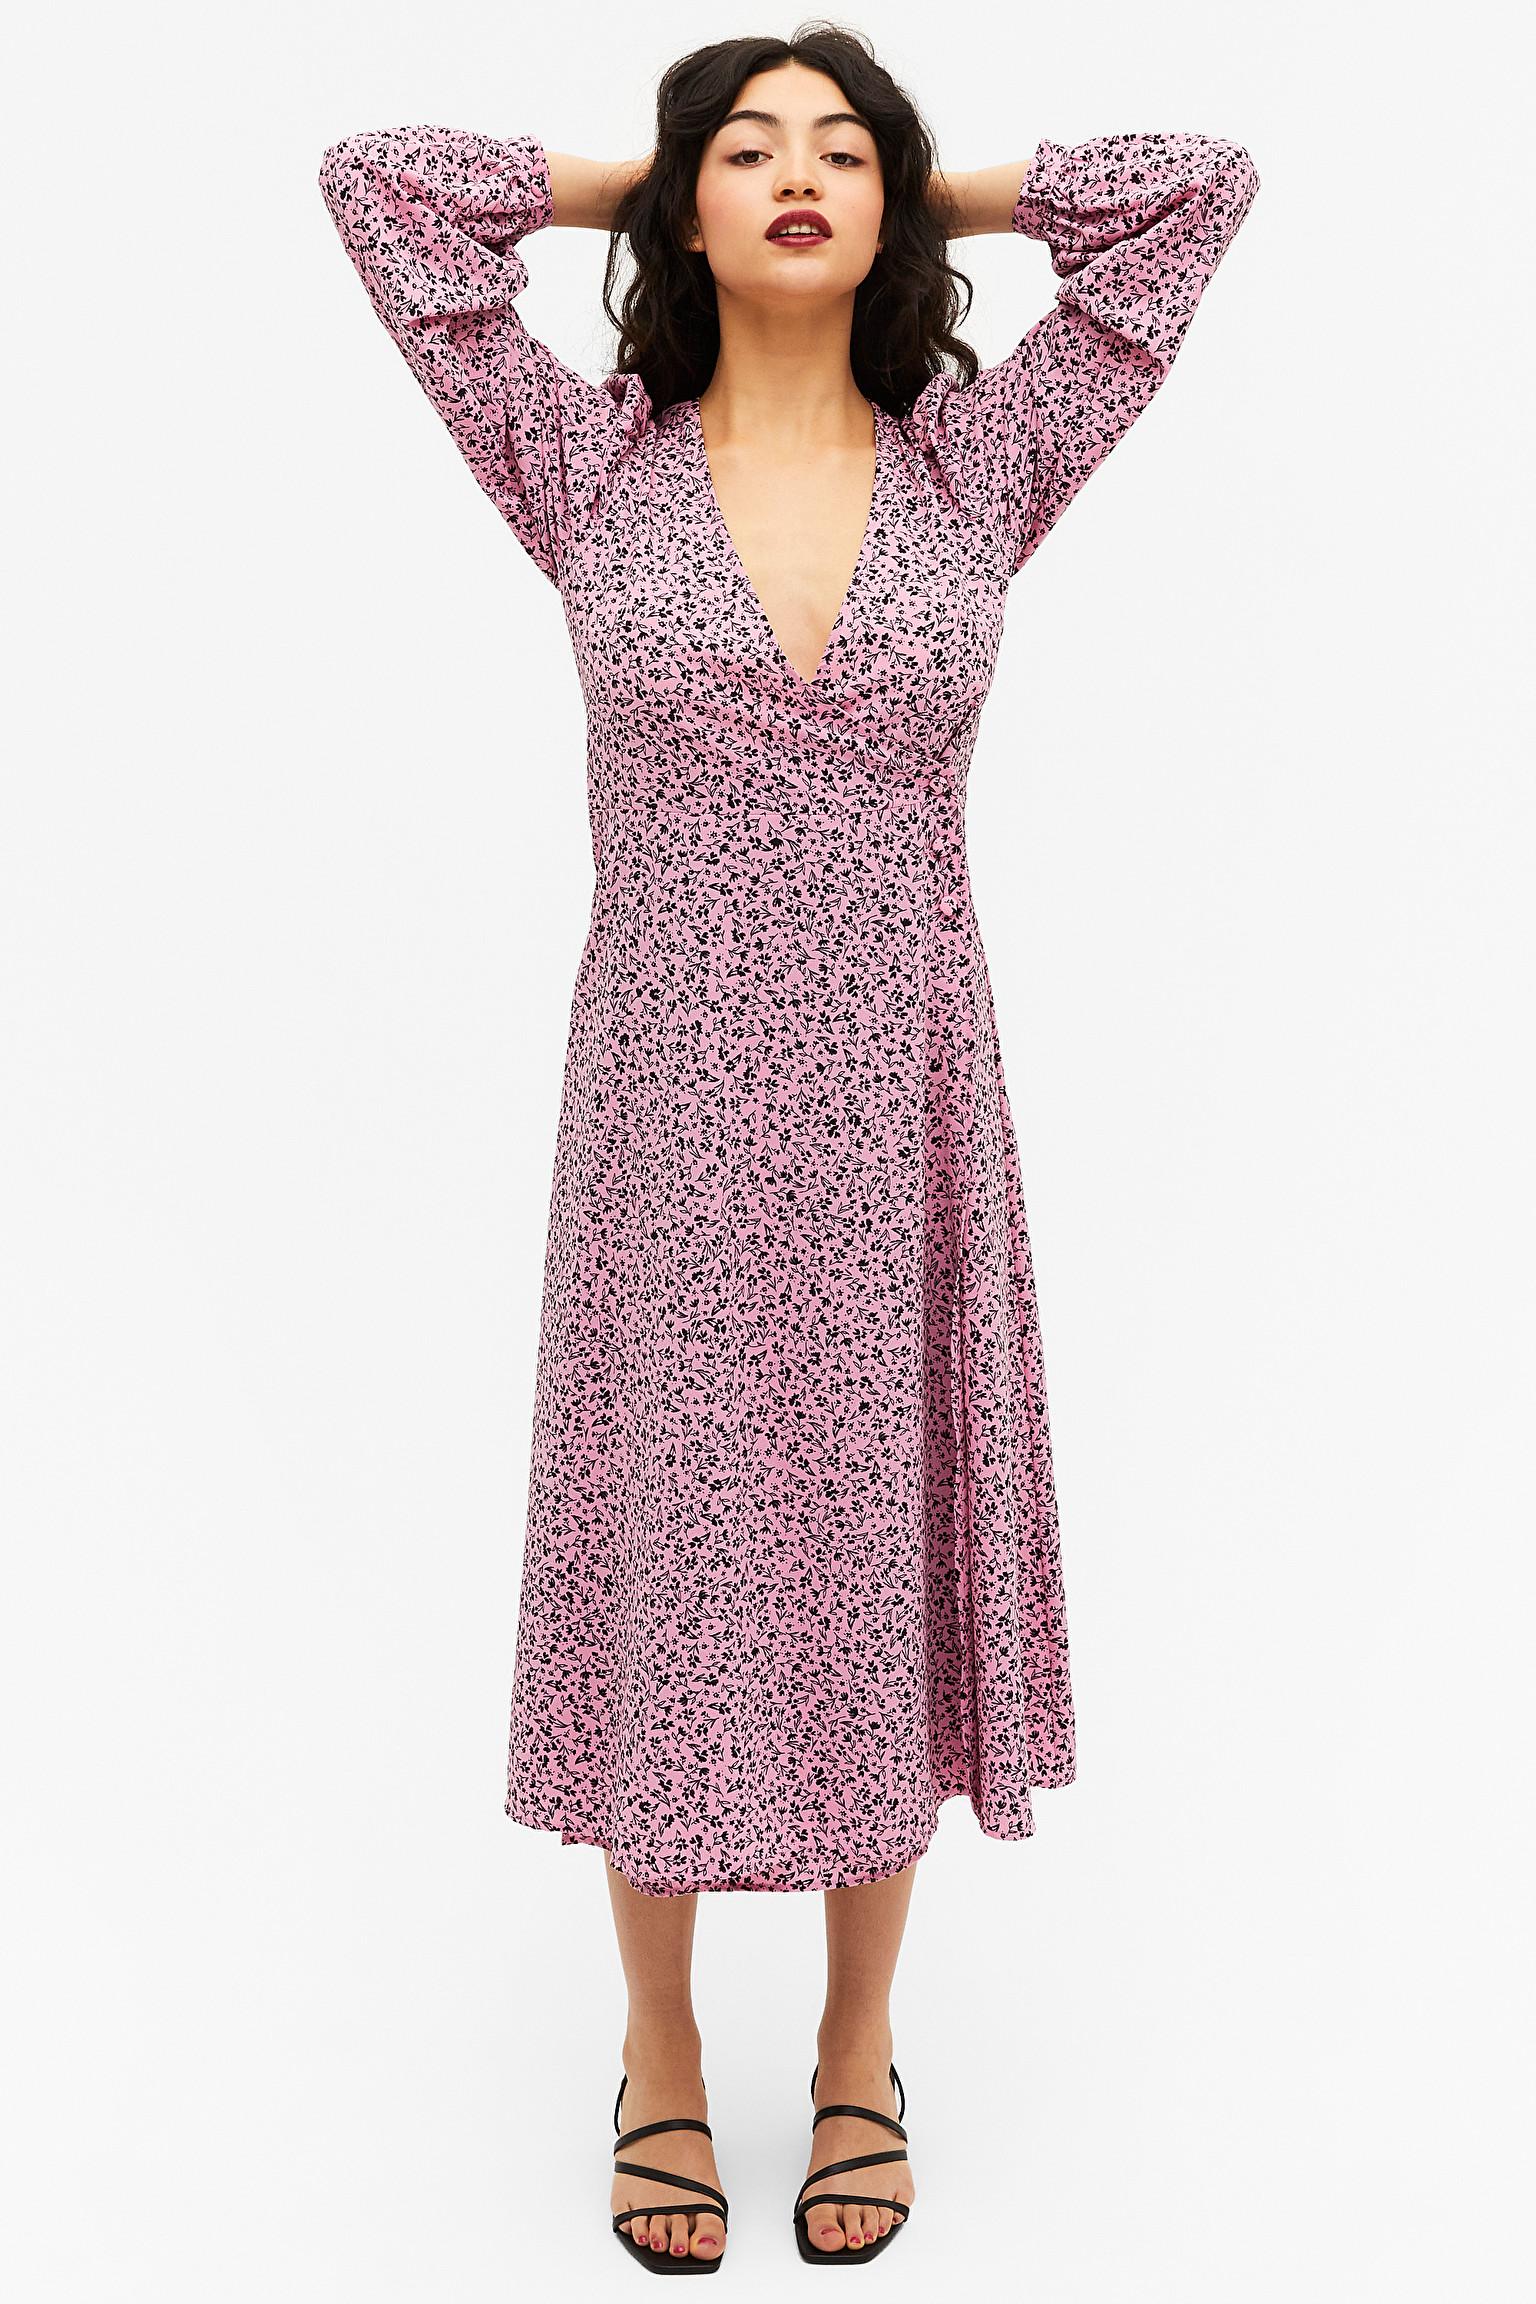 Monki Pink Floral Long Sleeve V-neck Dress in Purple | Lyst Canada